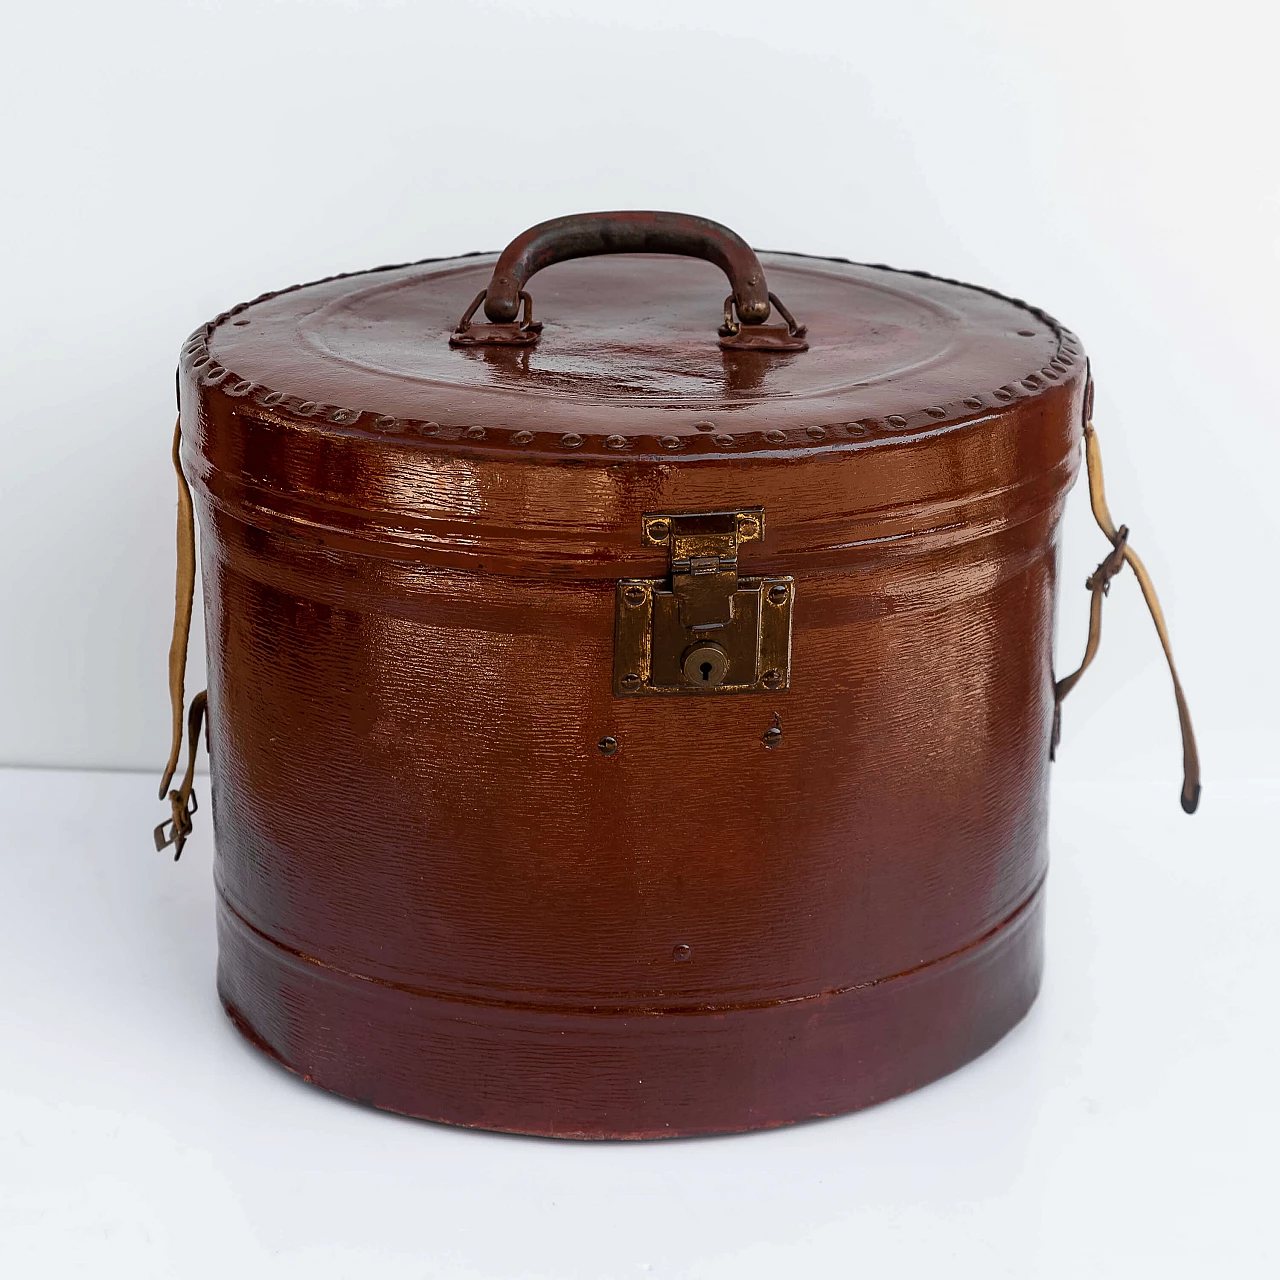 Hatbox in pressed cardboard in Siena earth colour, 1930s 1